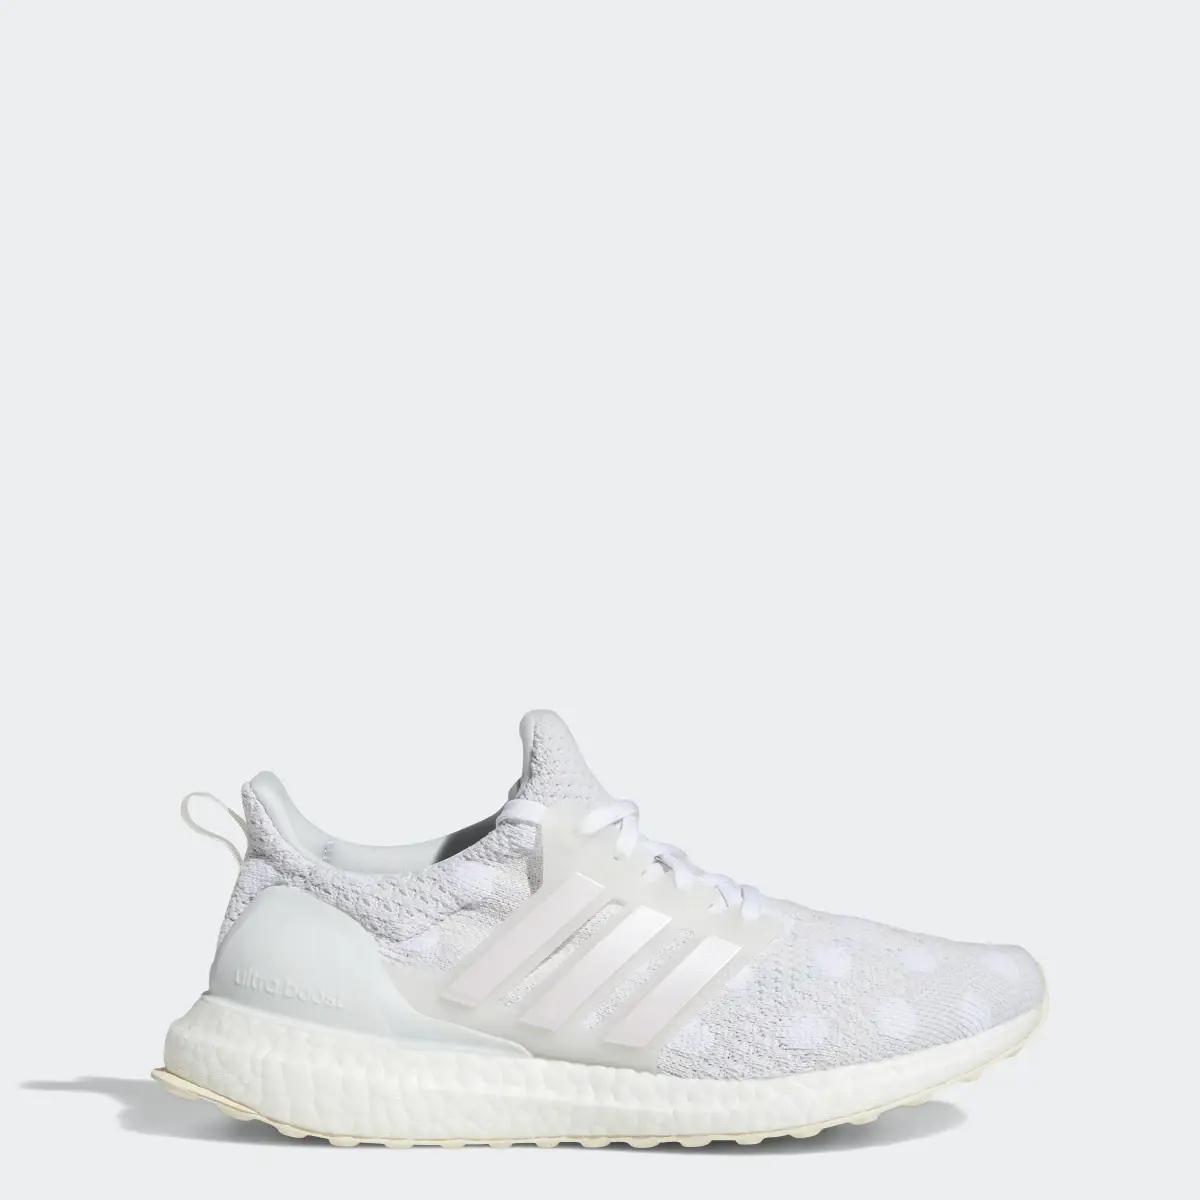 Adidas Ultraboost 5 DNA Shoes. 1